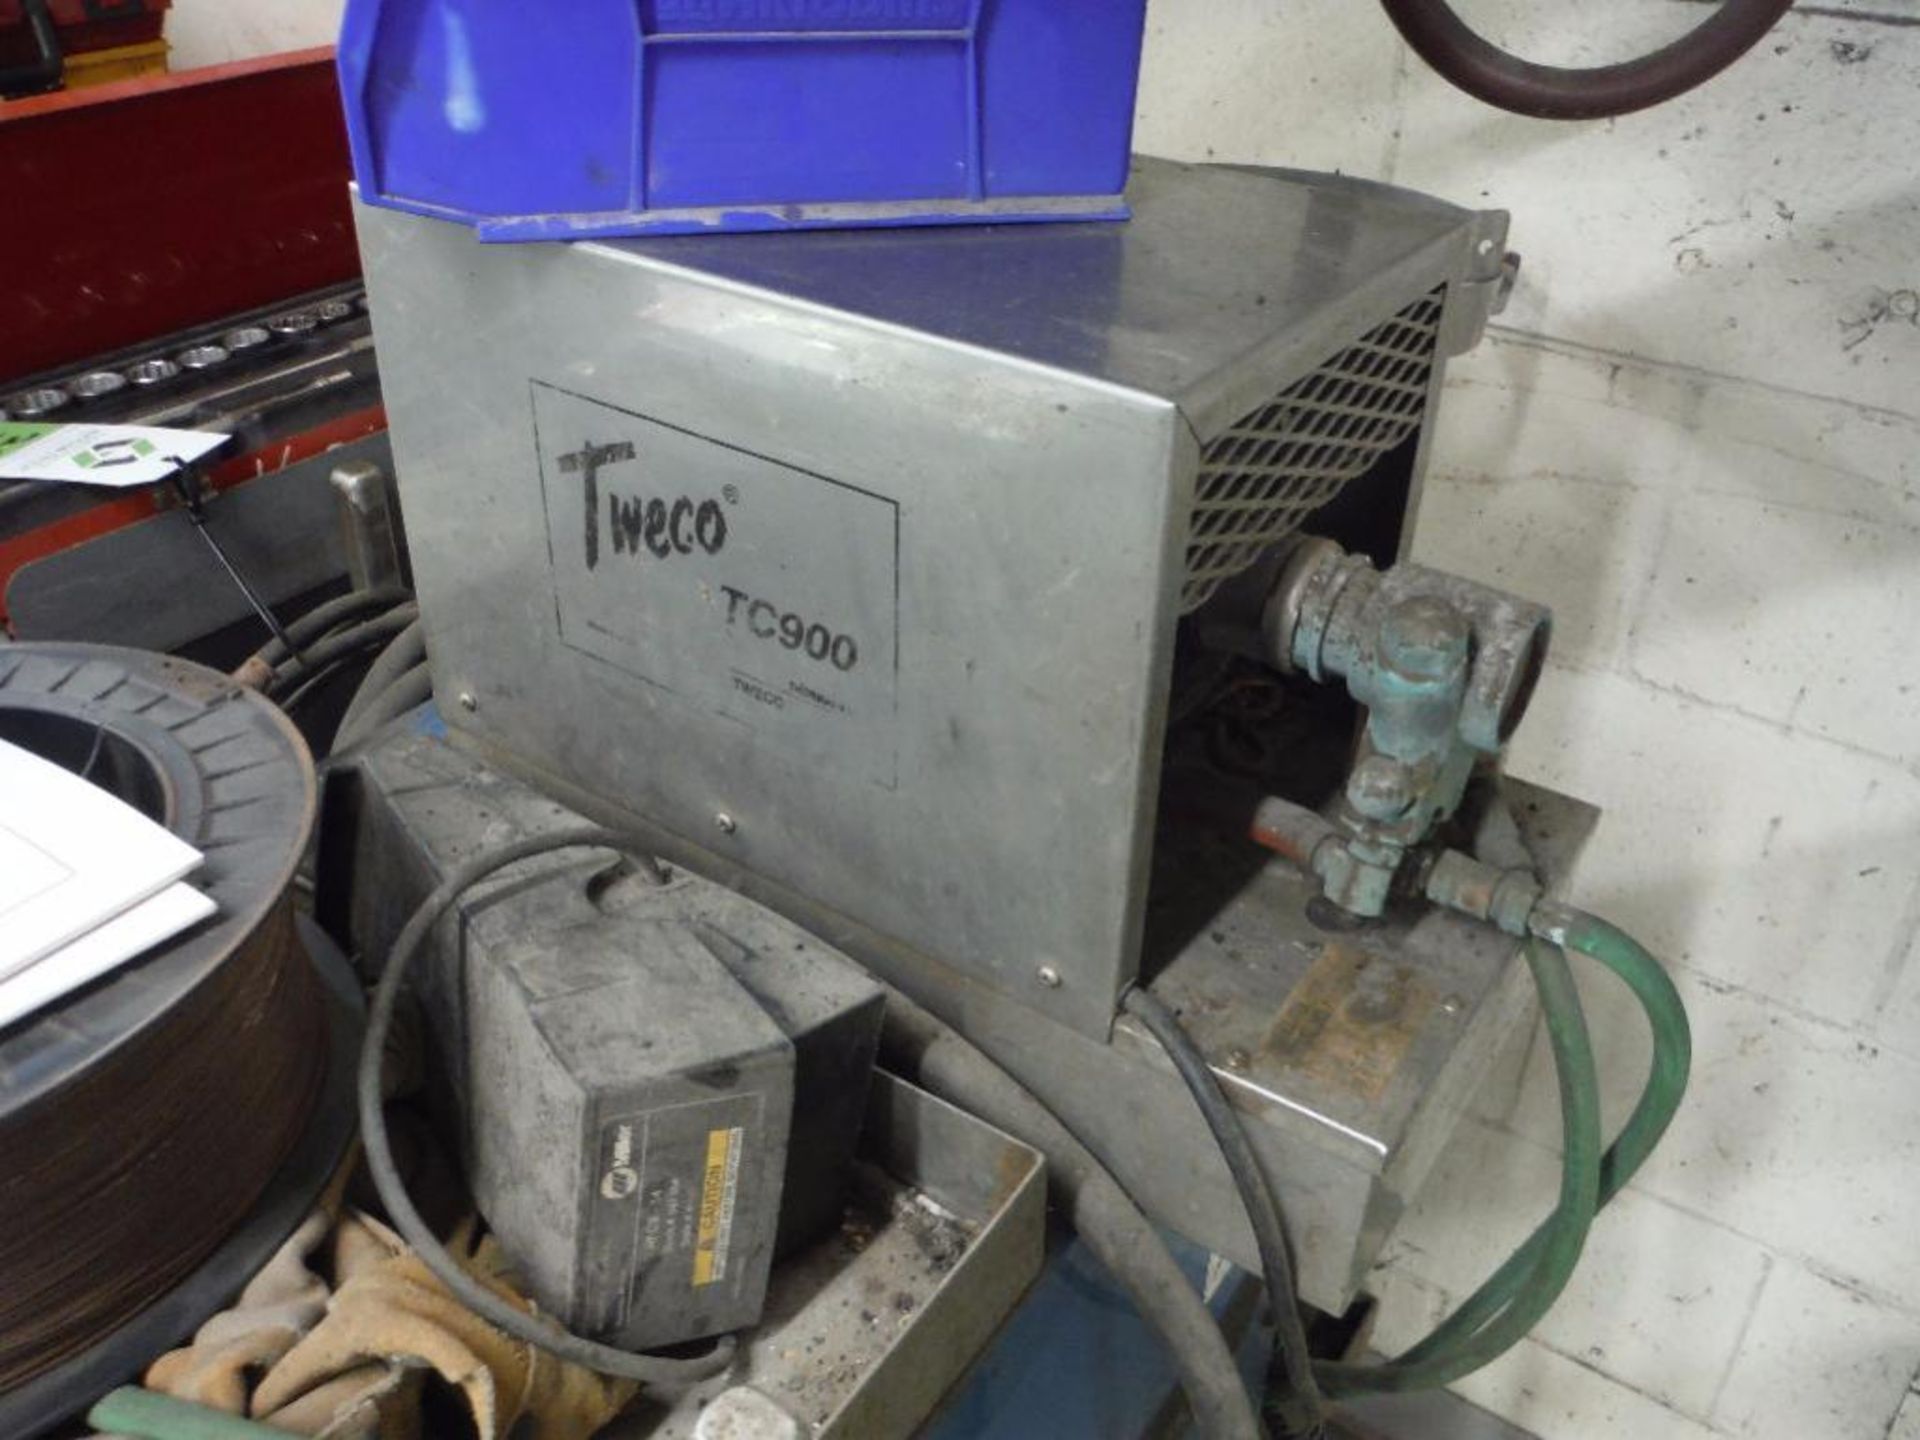 Miller synchro wave 250 AC/DC welder, foot control ** Rigging Fee: $25 ** - Image 8 of 11